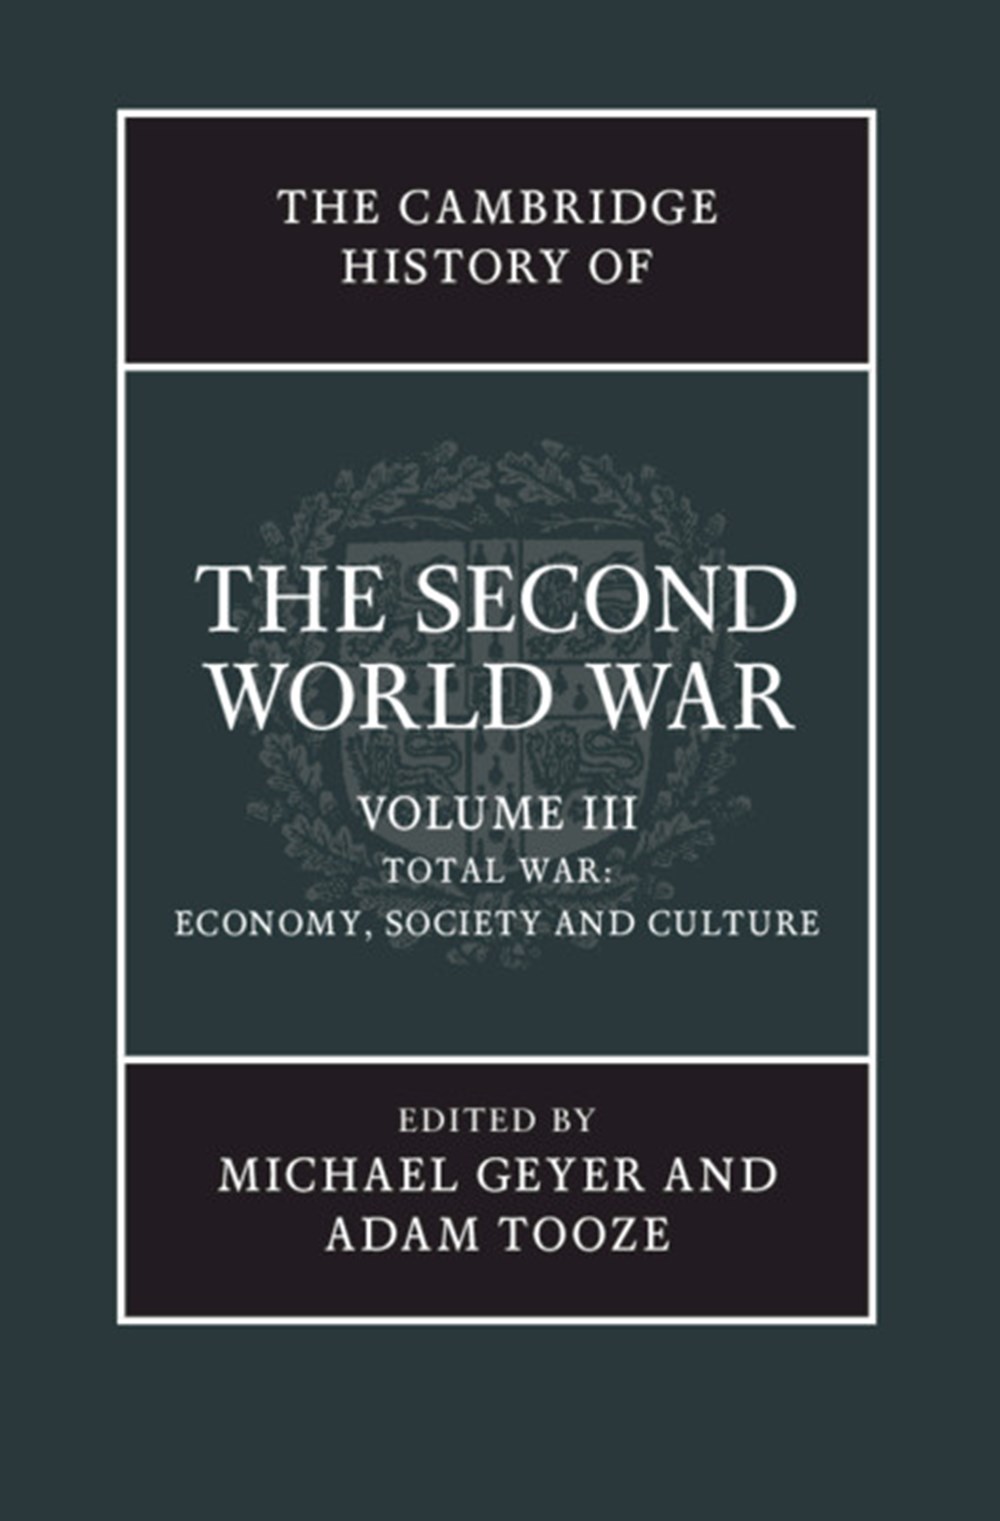 Cambridge History of the Second World War, Volume 3 Total War: Economy, Society and Culture